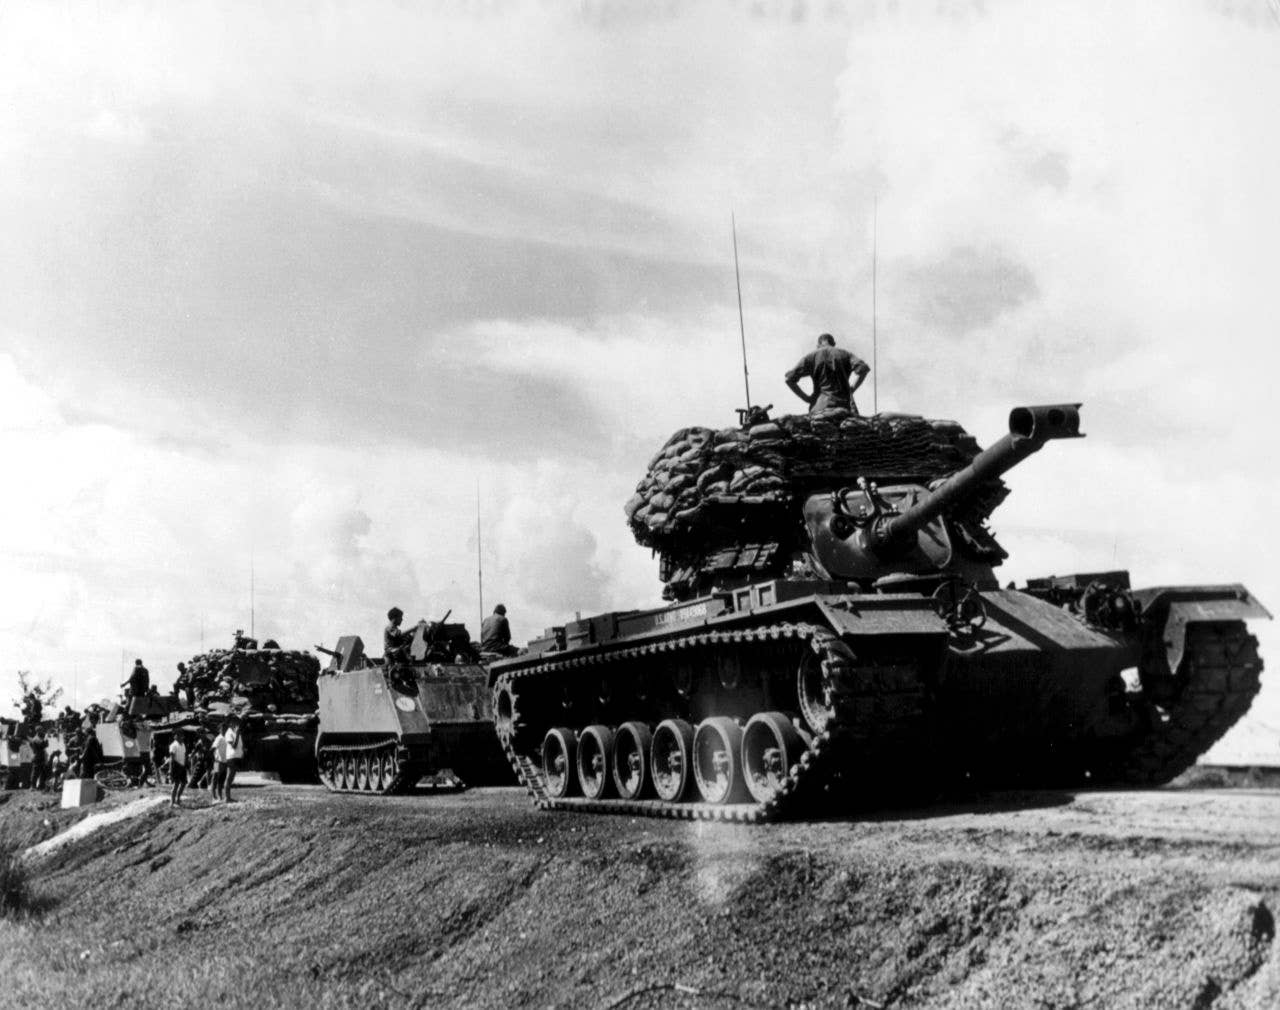 M48 Pattons were advanced and capable tanks during the Cold War. The M48s in this column in Vietnam were fitted with sandbags on the turrets to turn them into mobile pillboxes. (U.S. Army)